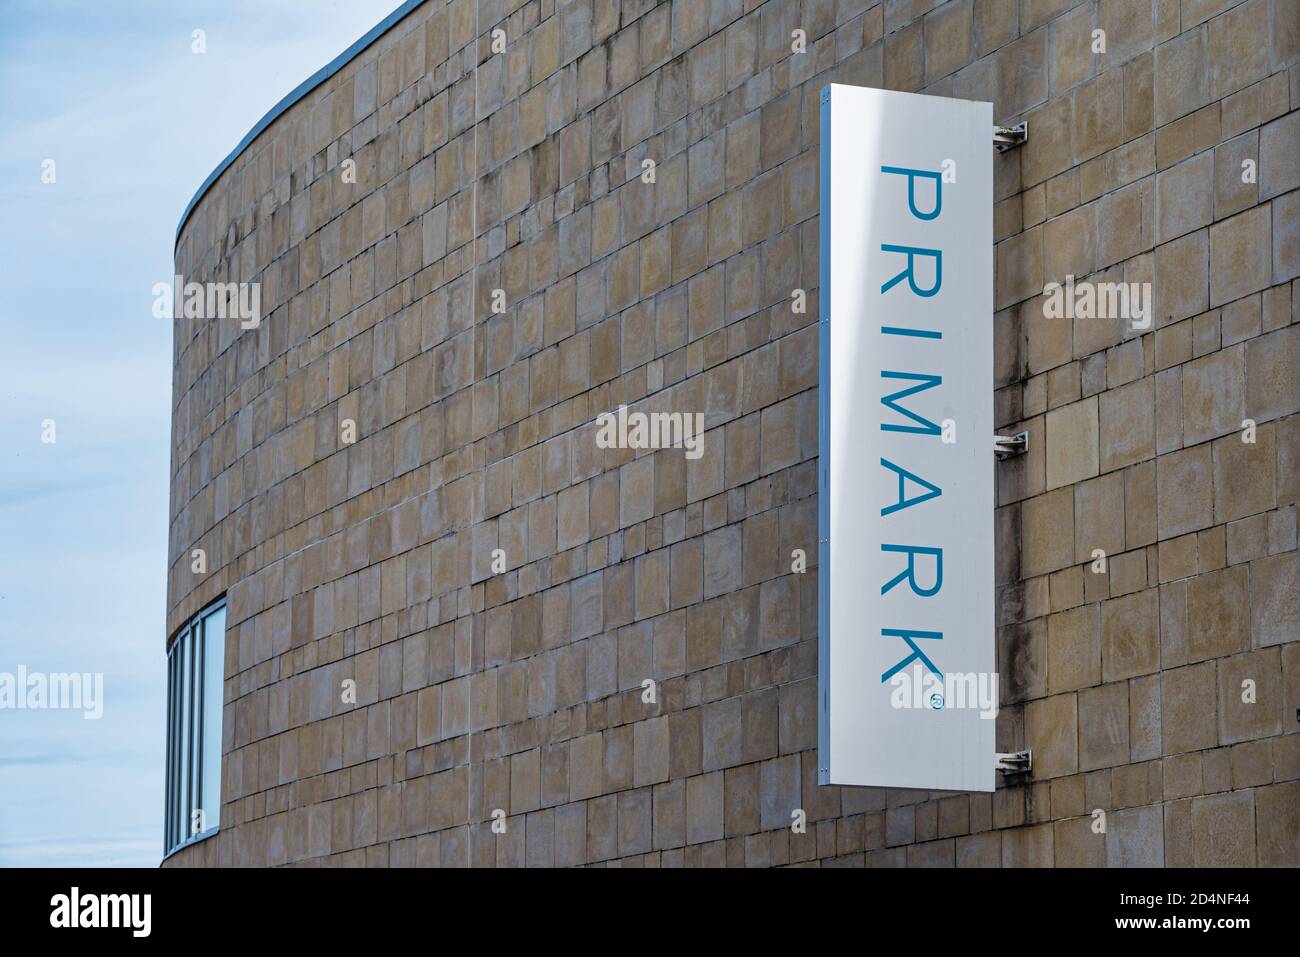 Derry, Northern Ireland- Sept 27, 2020: The sign for Primark store in Derry. Stock Photo